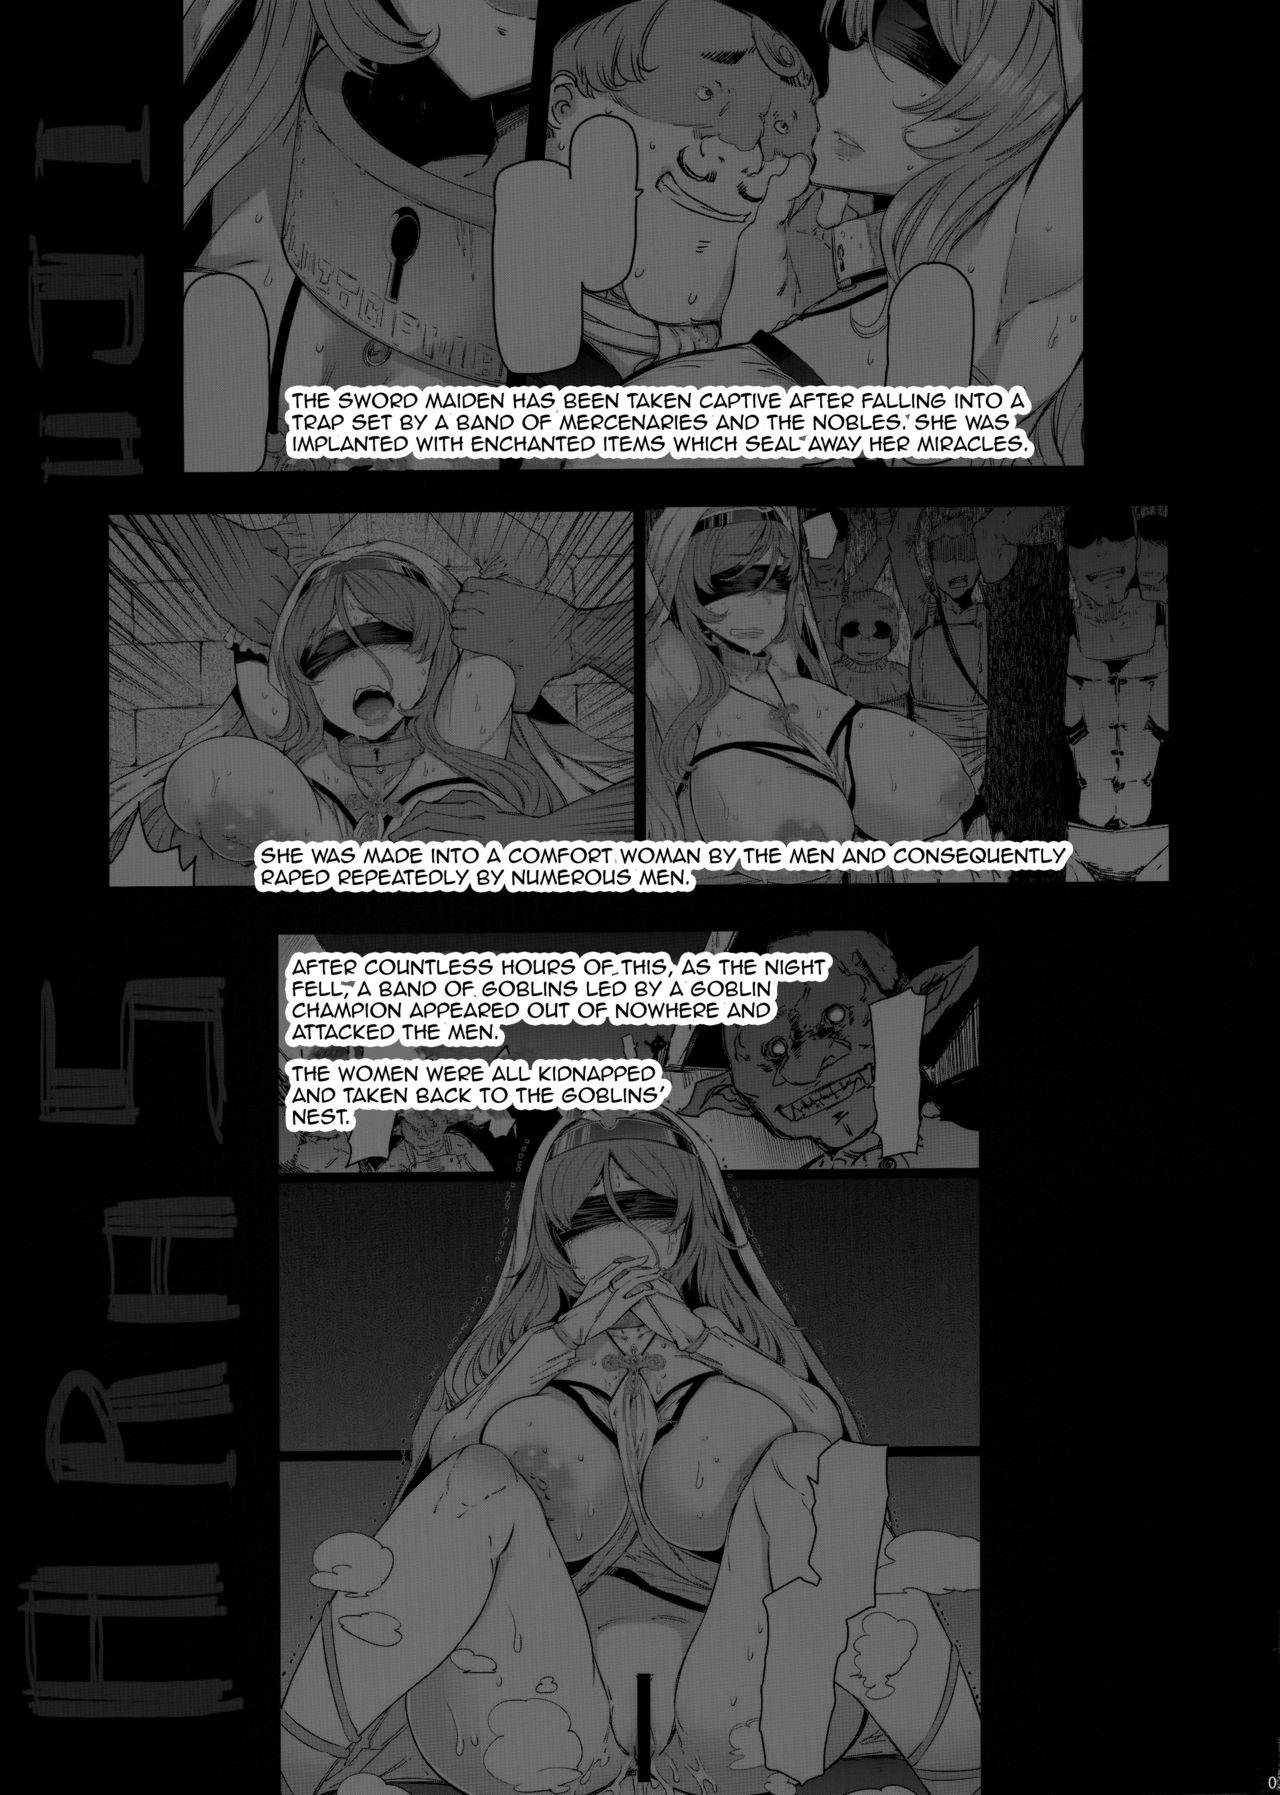 Family Roleplay Sanku no Otome Kouhen | Maid of Misery - After Part - Goblin slayer Mature Woman - Page 2